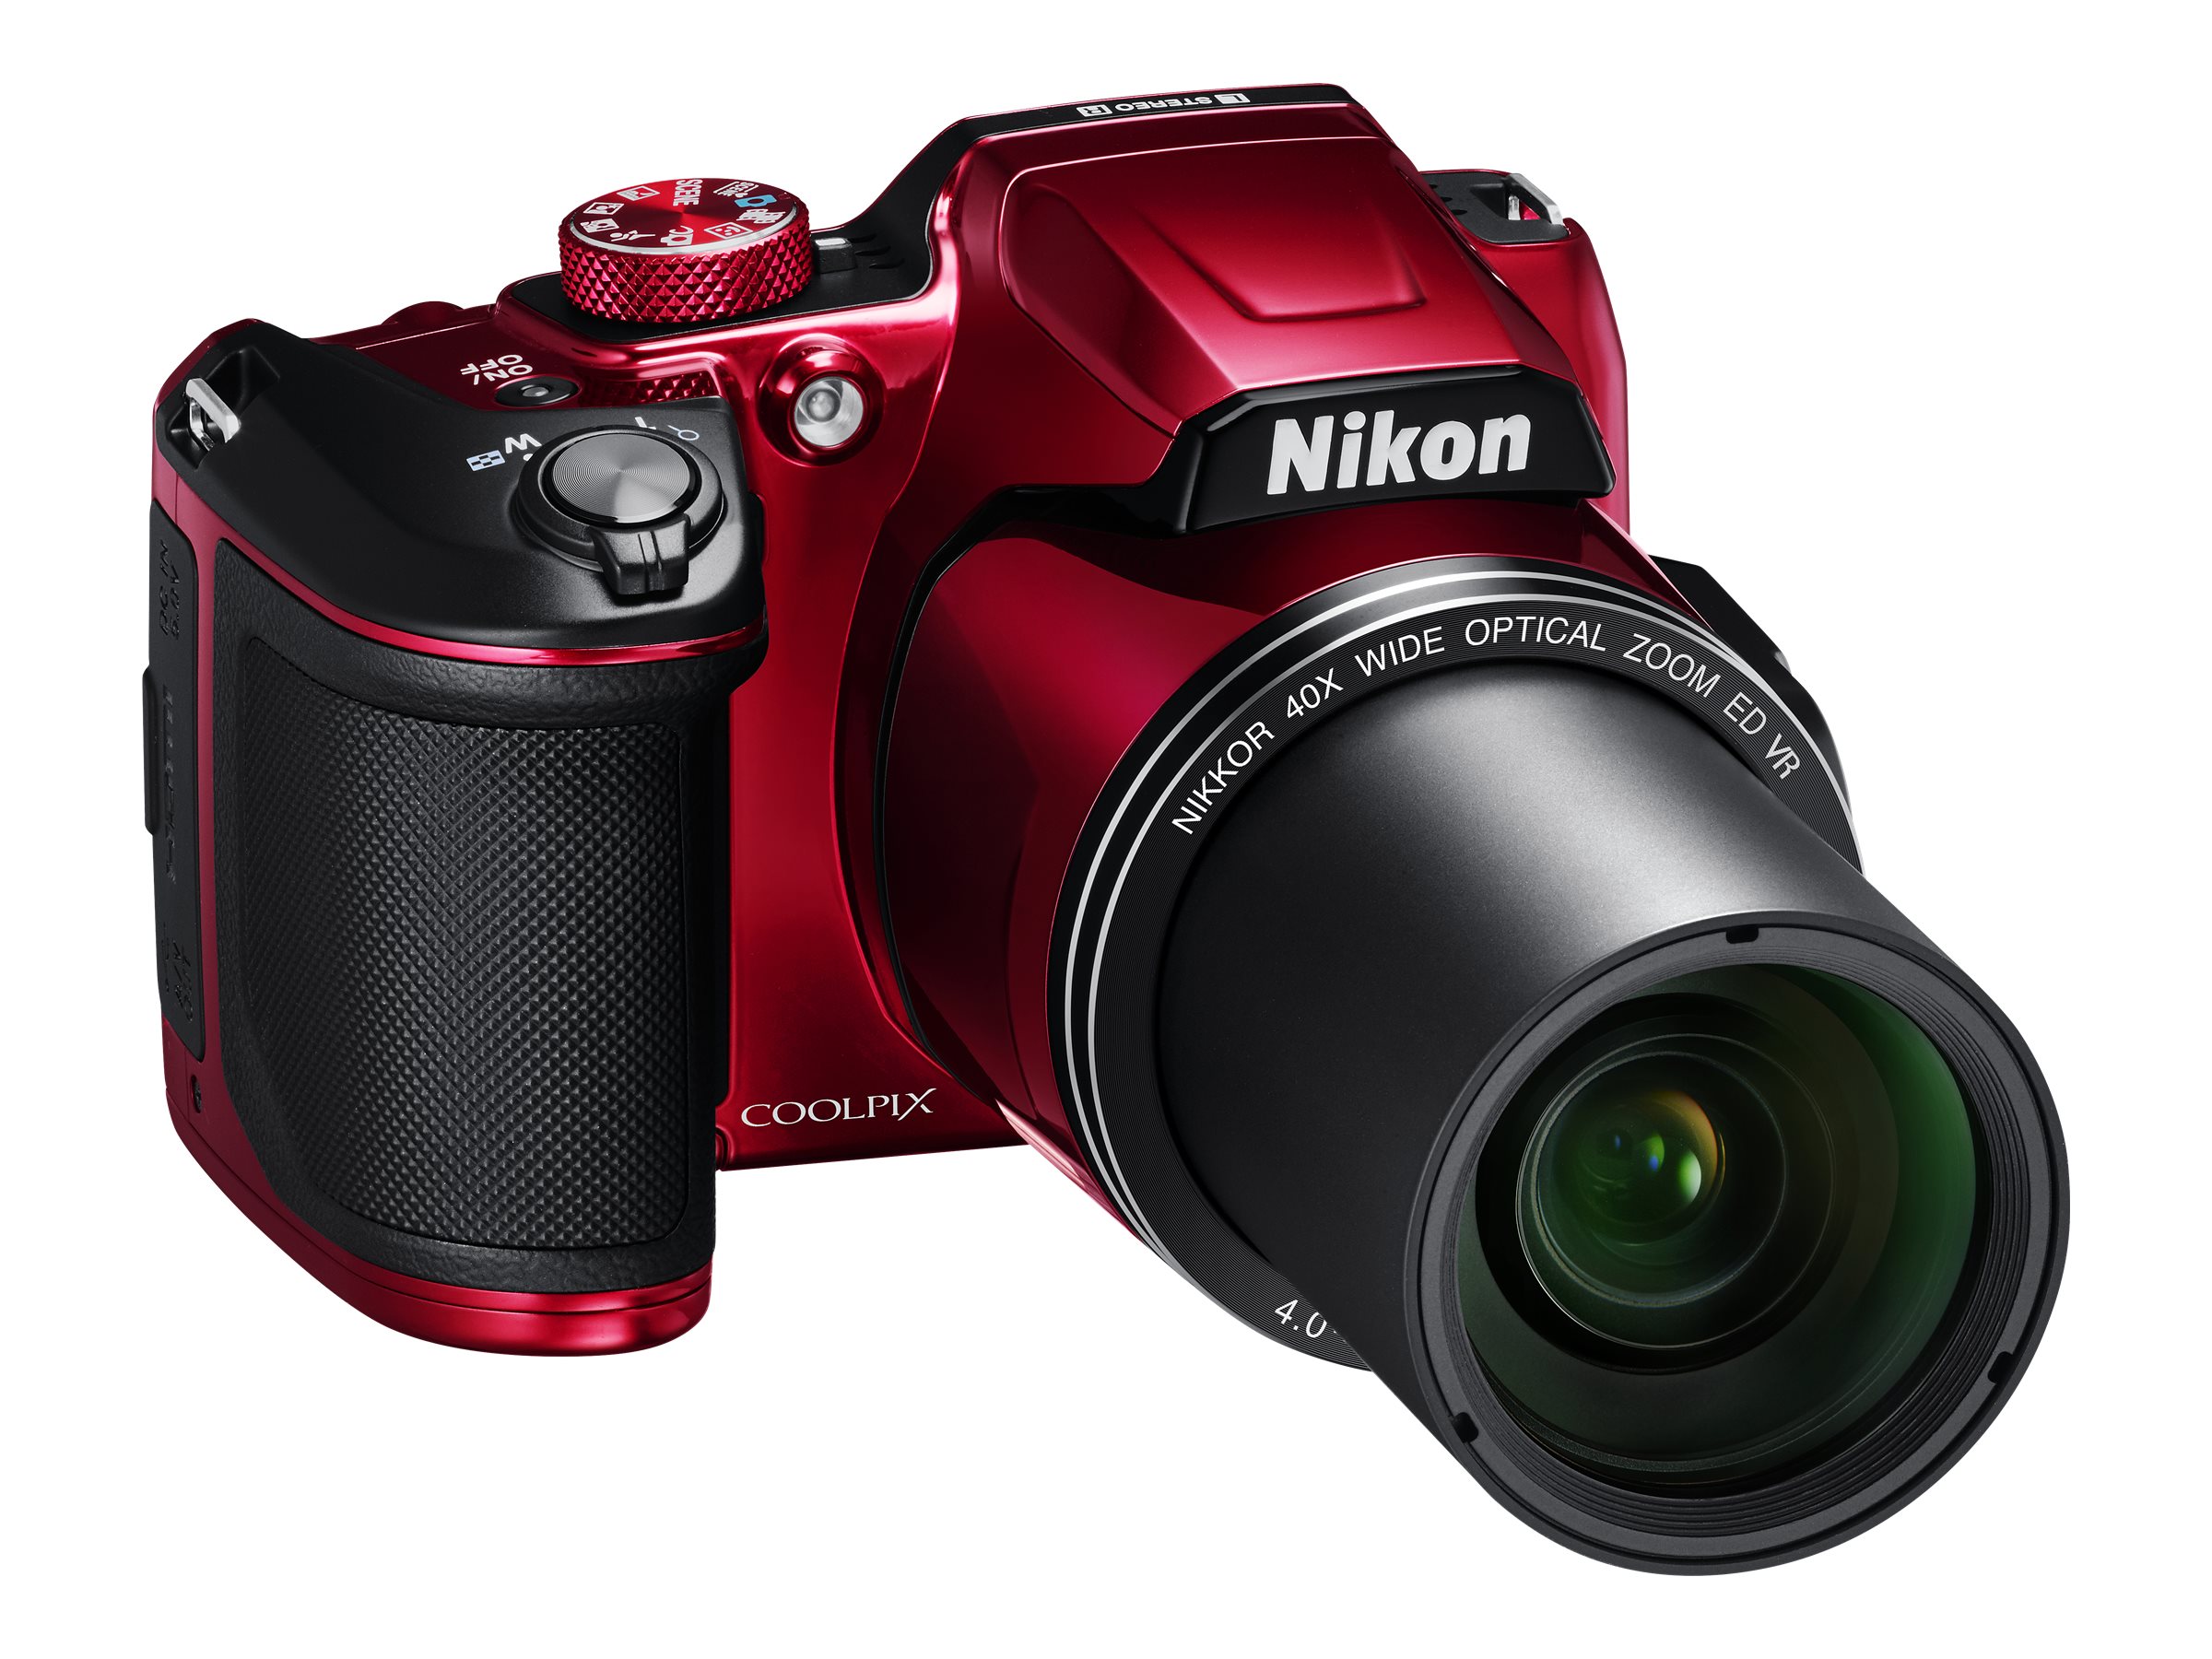 Nikon Red COOLPIX B500 Digital Camera with 16 Megapixels and 40x Optical Zoom - image 4 of 11